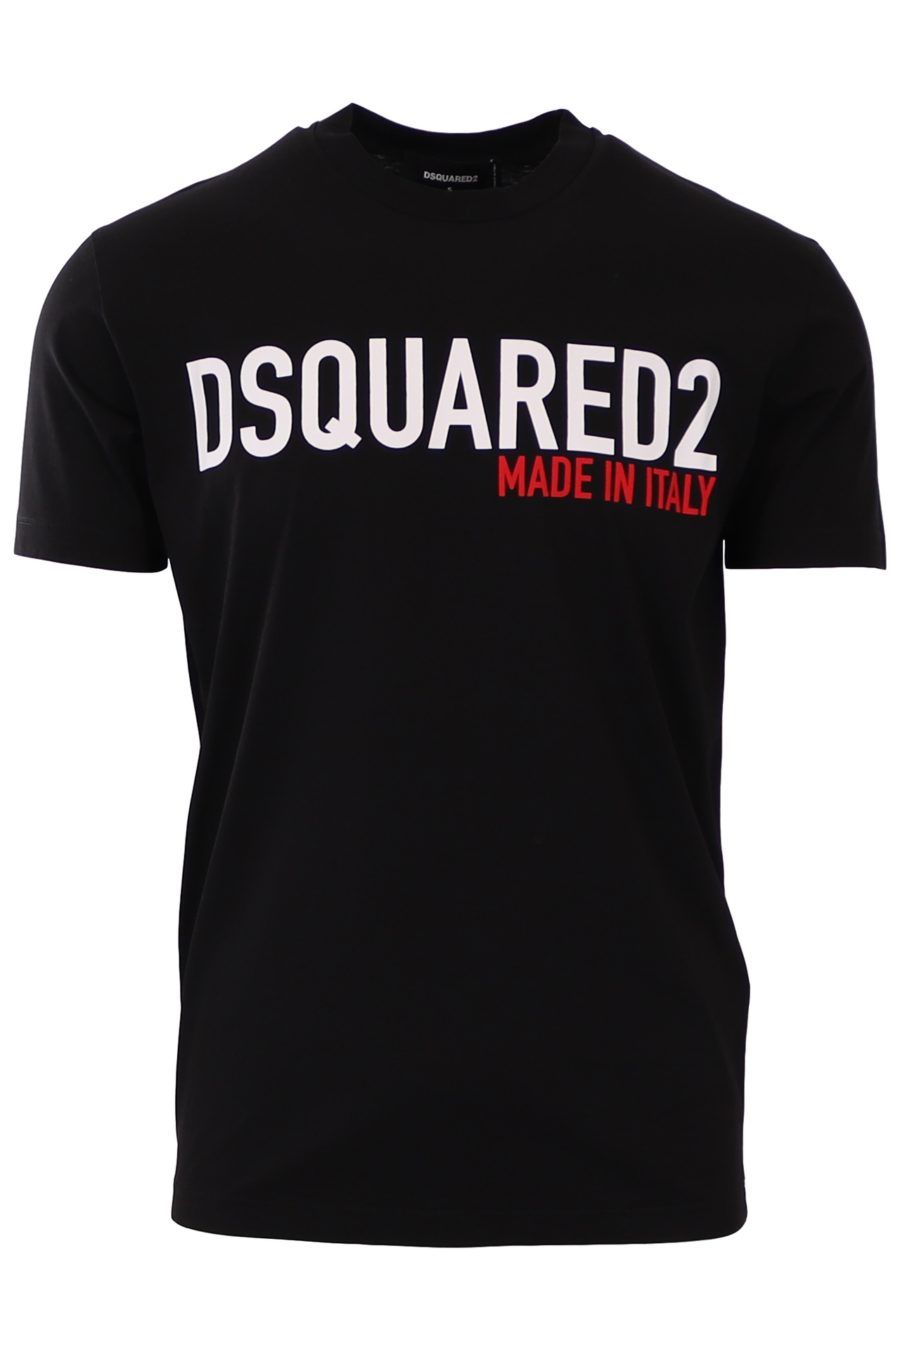 T-shirt Dsquared2 noir logo blanc made in italy - 45c056261d42c27c59f00c286582c632f68caf4d